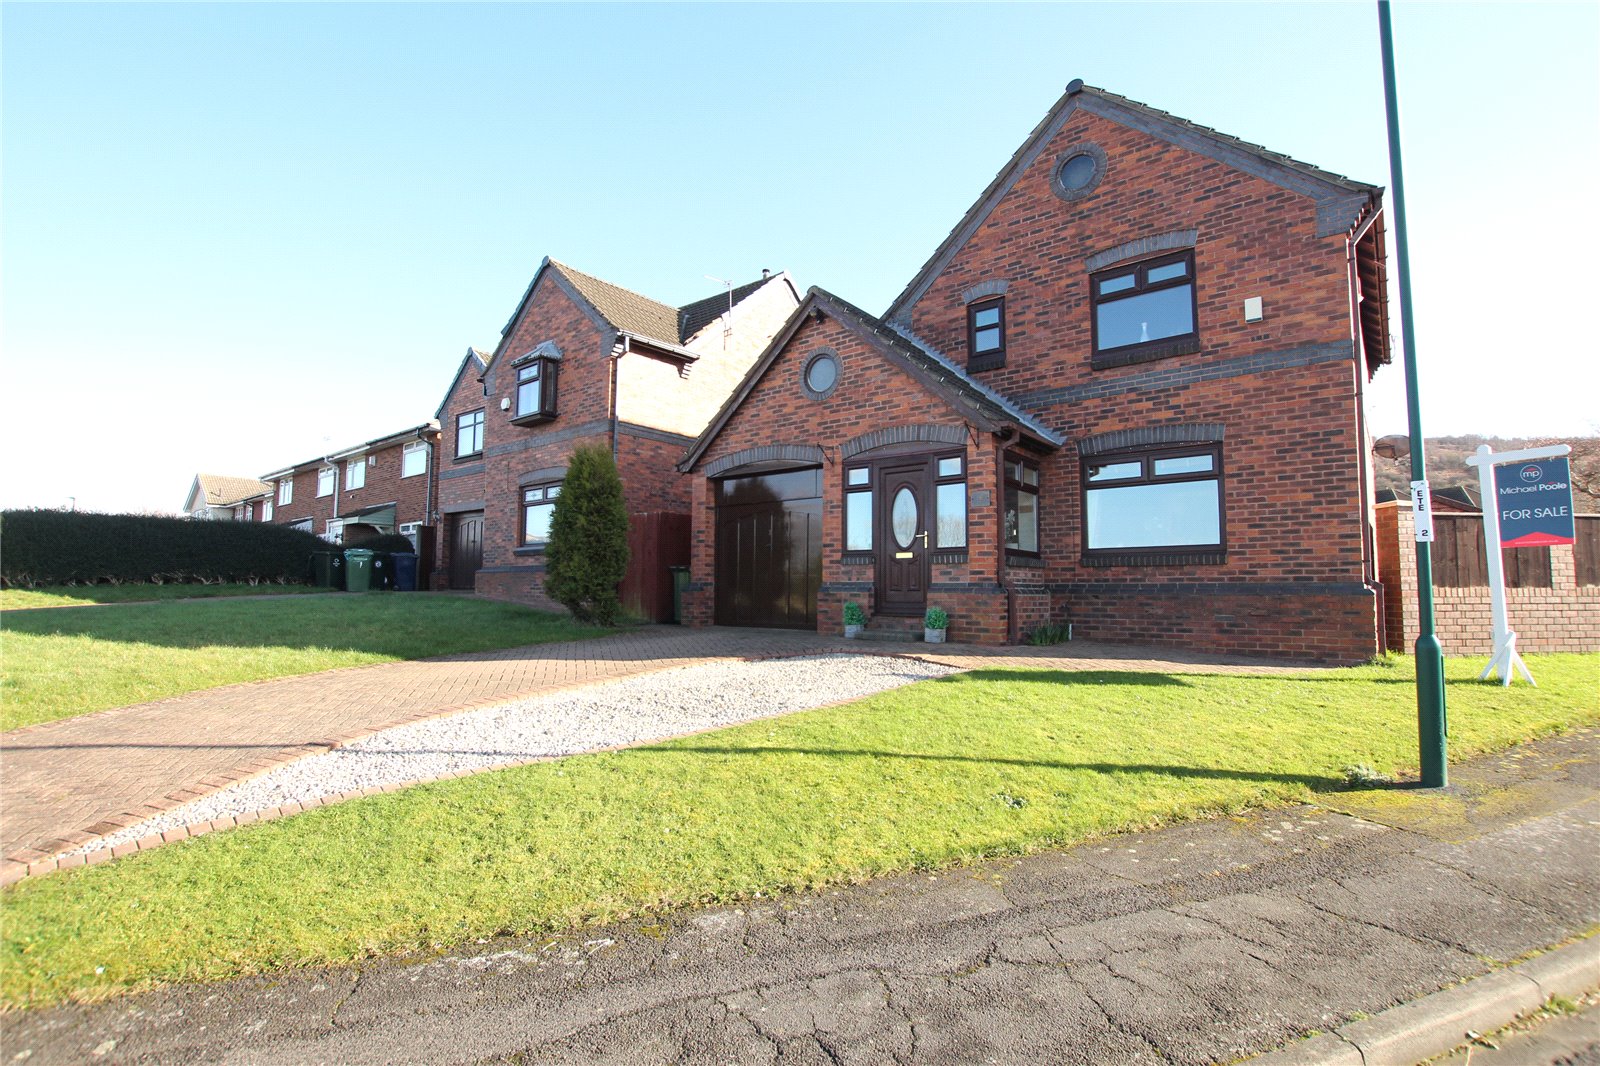 3 bed house for sale in Stonegate, Eston - Property Image 1